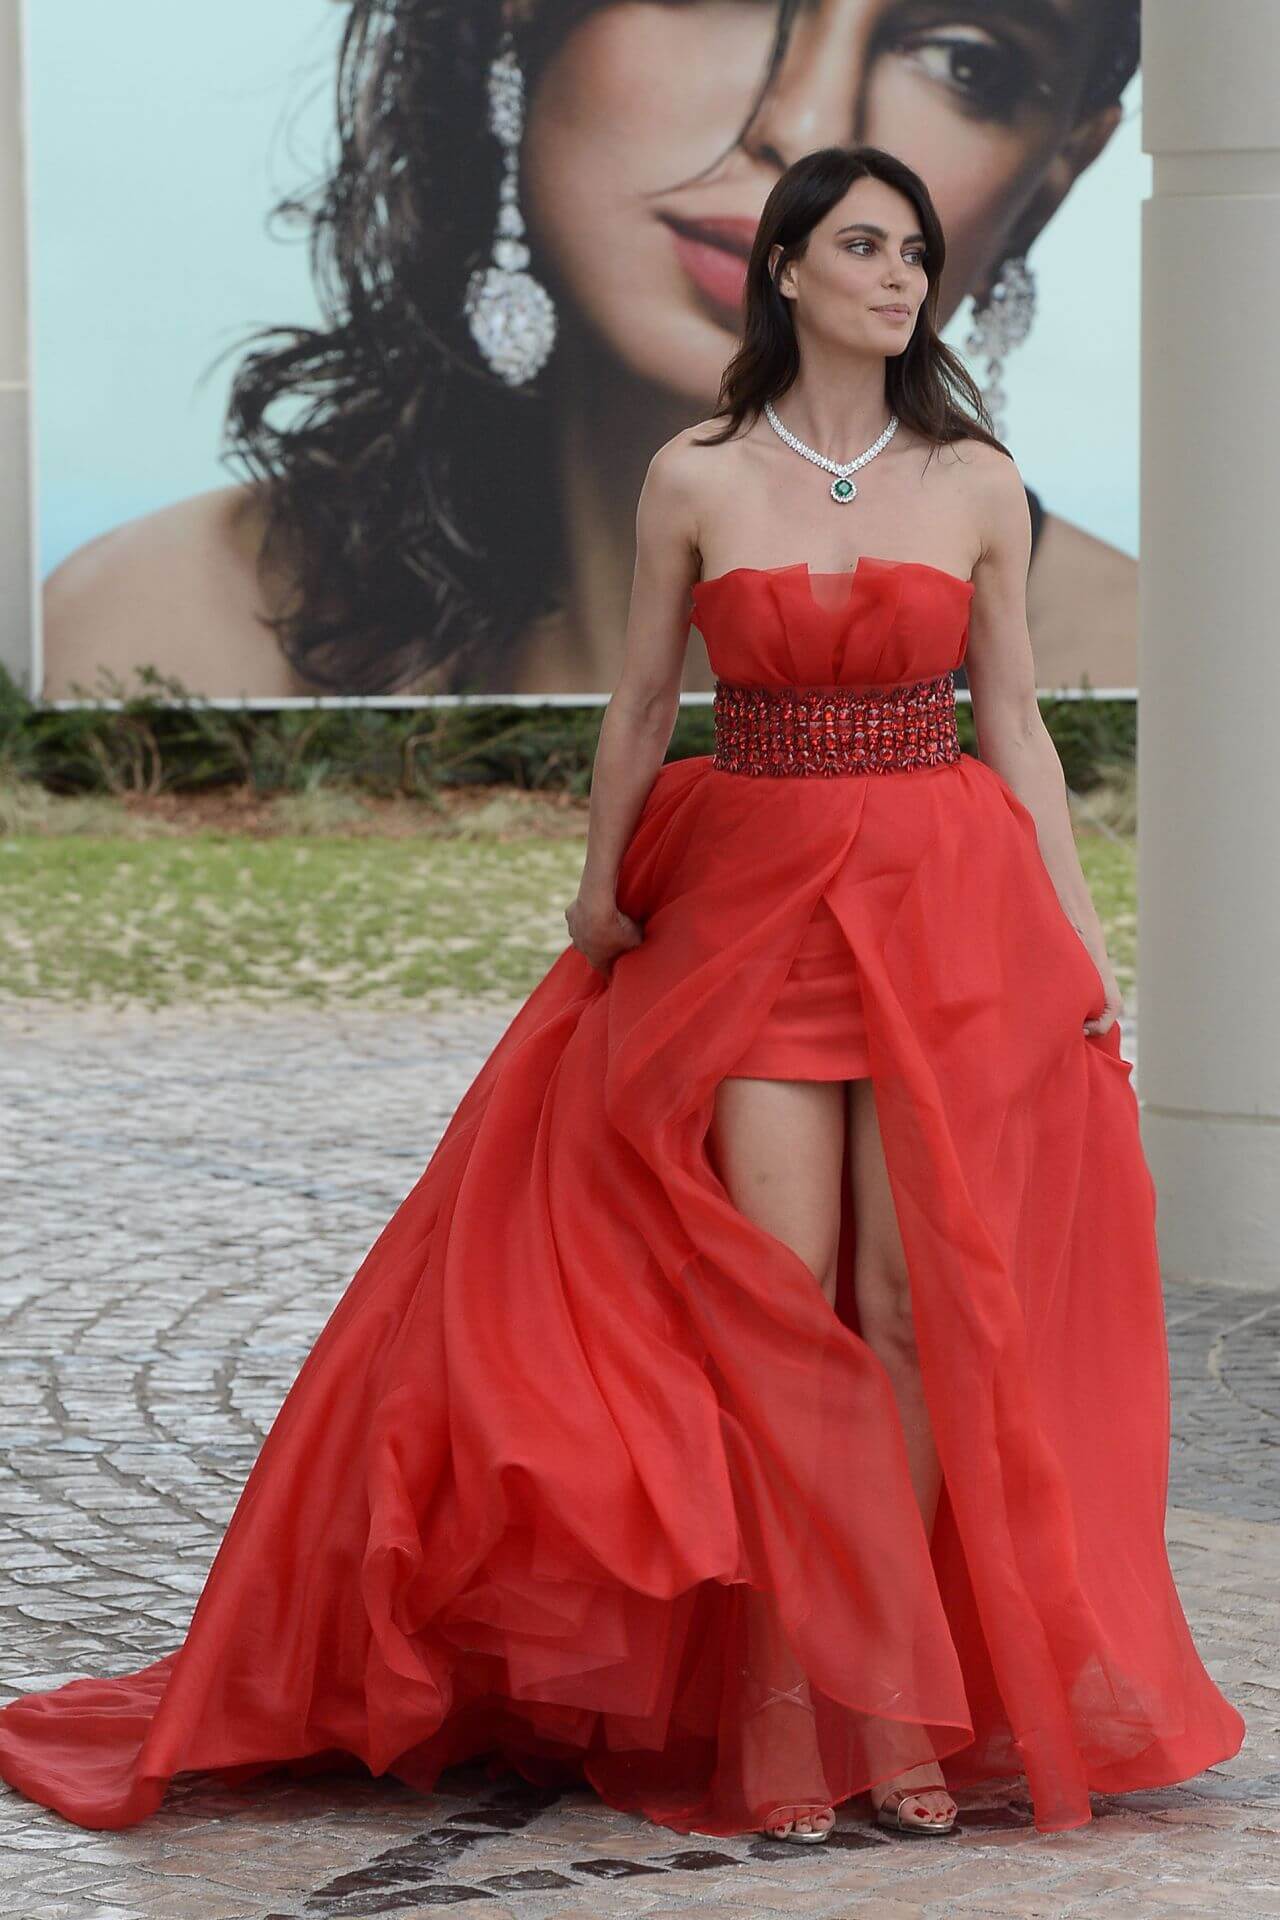 Catrinel Menghia Gorgeous Looks In Red Net Fabric Strapless A-Line Gown in Cannes